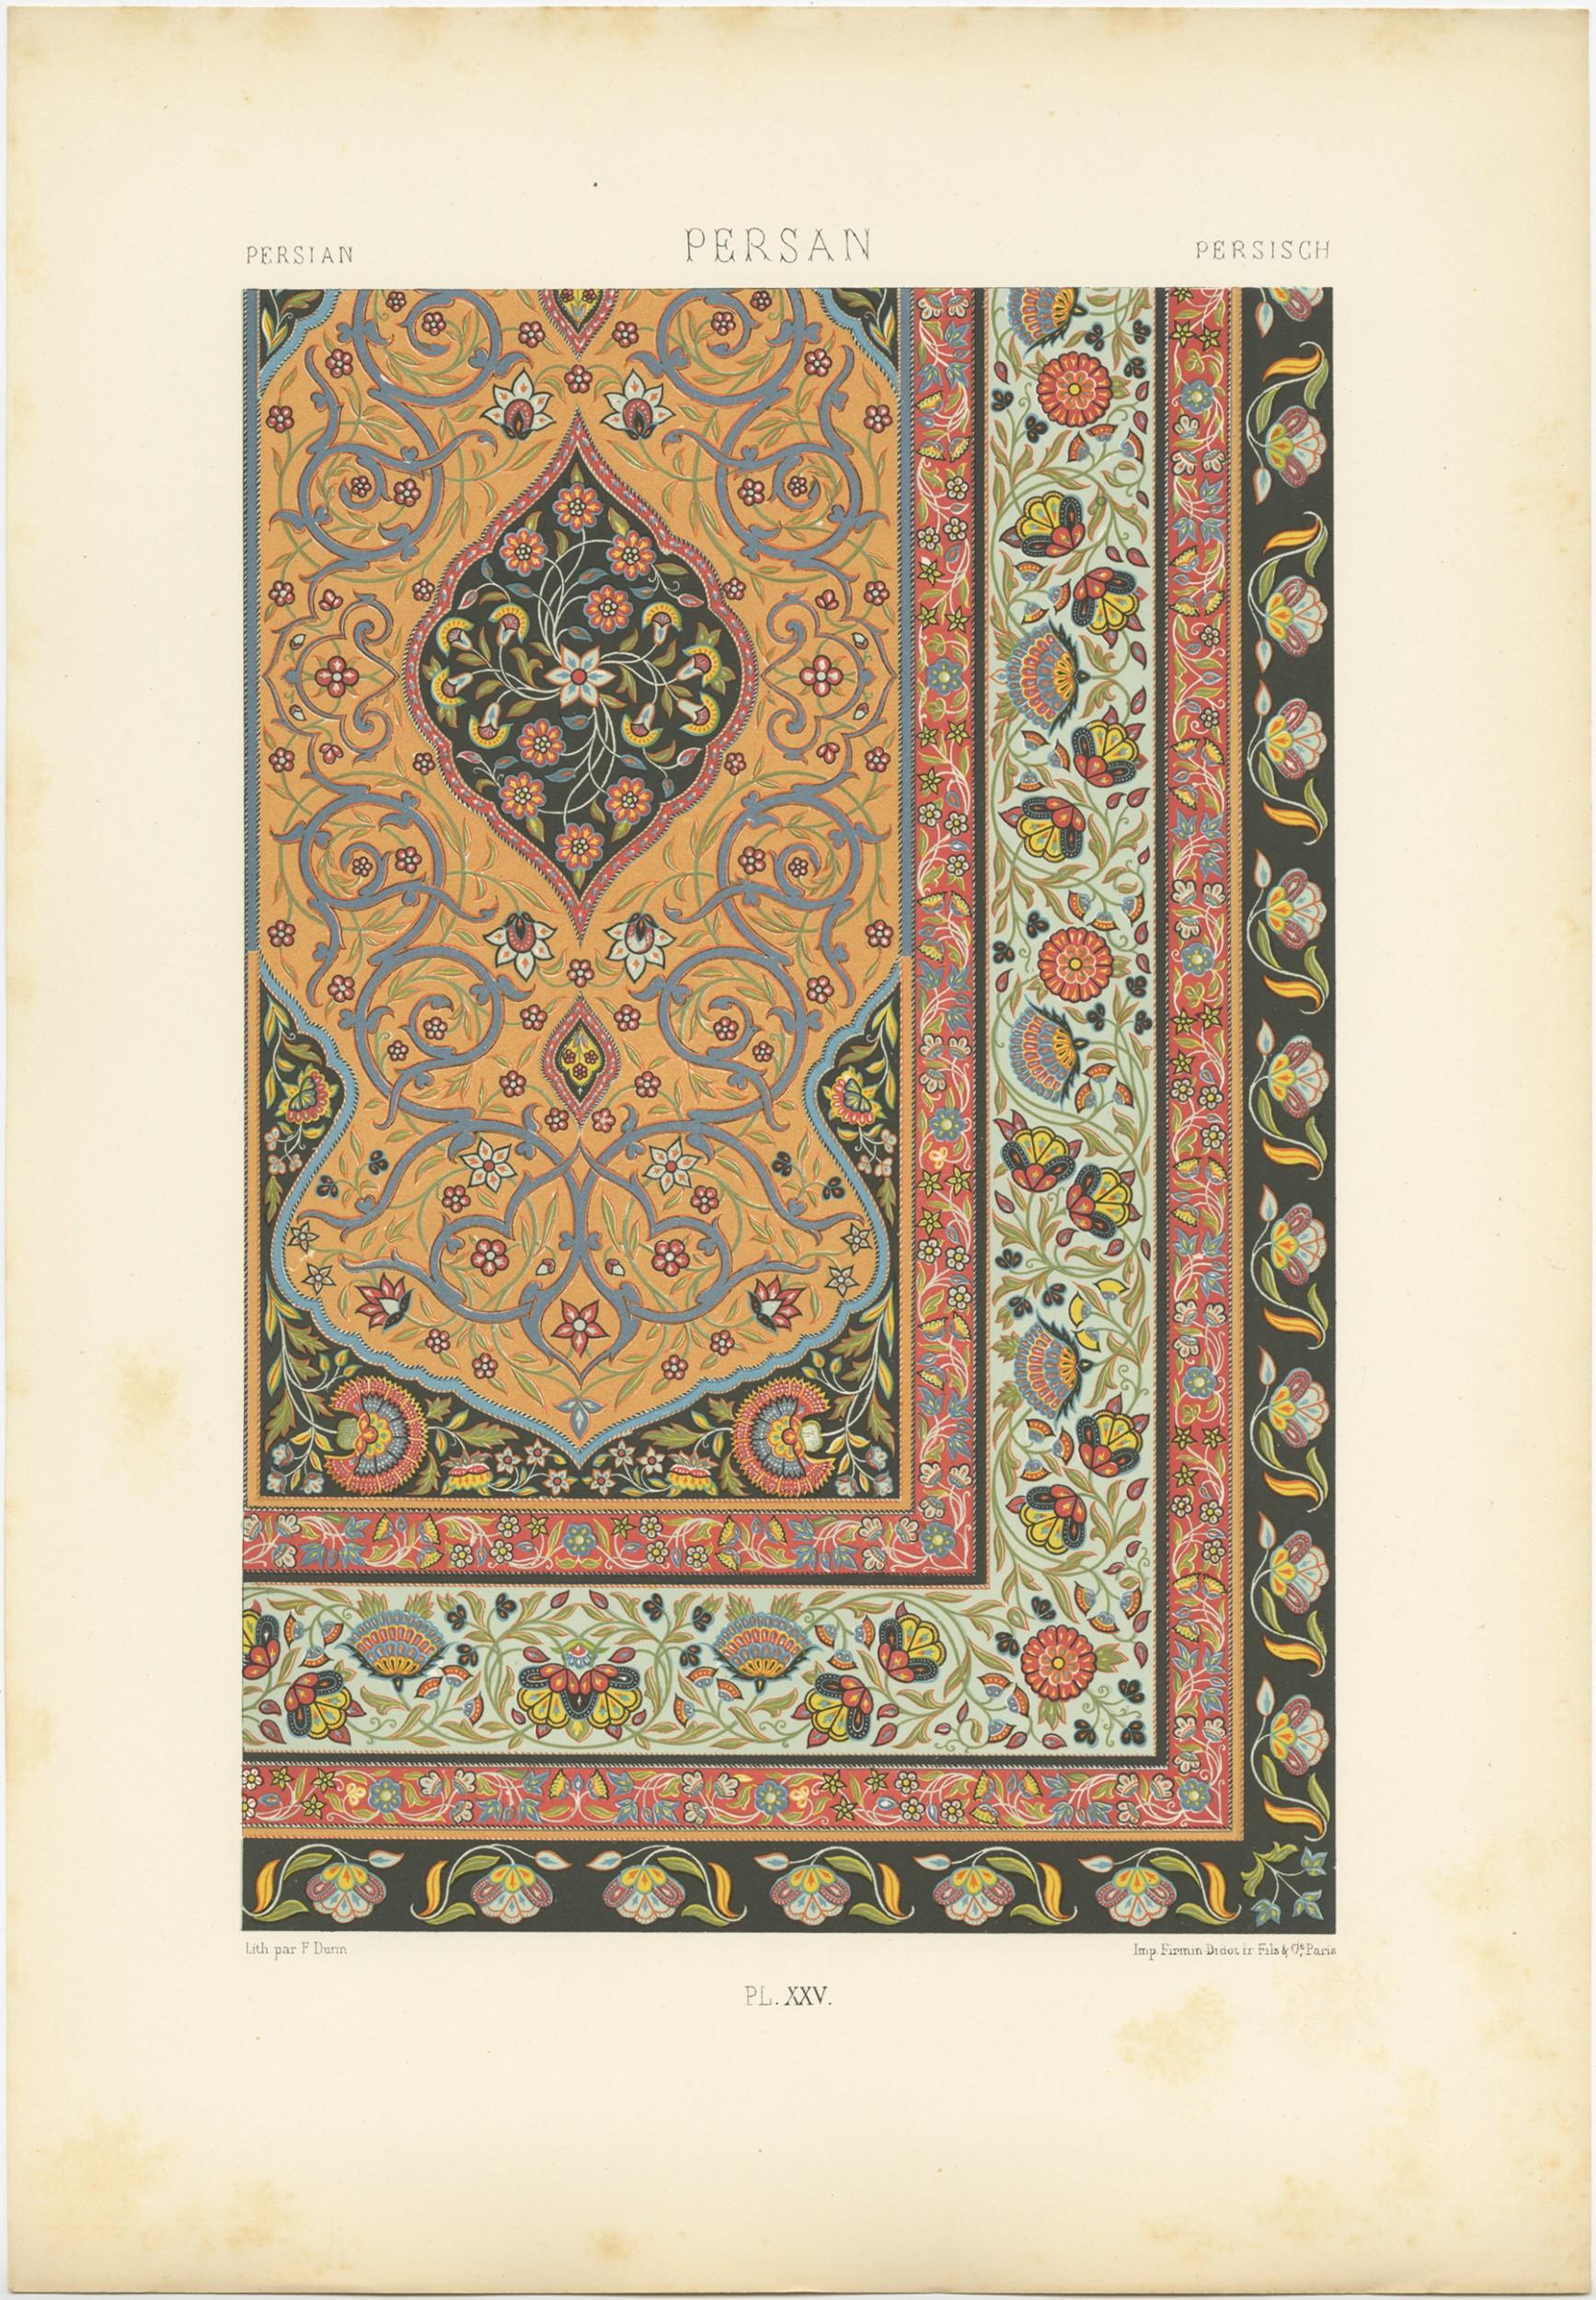 Antique print titled 'Persian - Persan - Persisch'. Chromolithograph of Persian ornaments and decorative arts. This print originates from 'l'Ornement Polychrome' by Auguste Racinet. Published circa 1890.